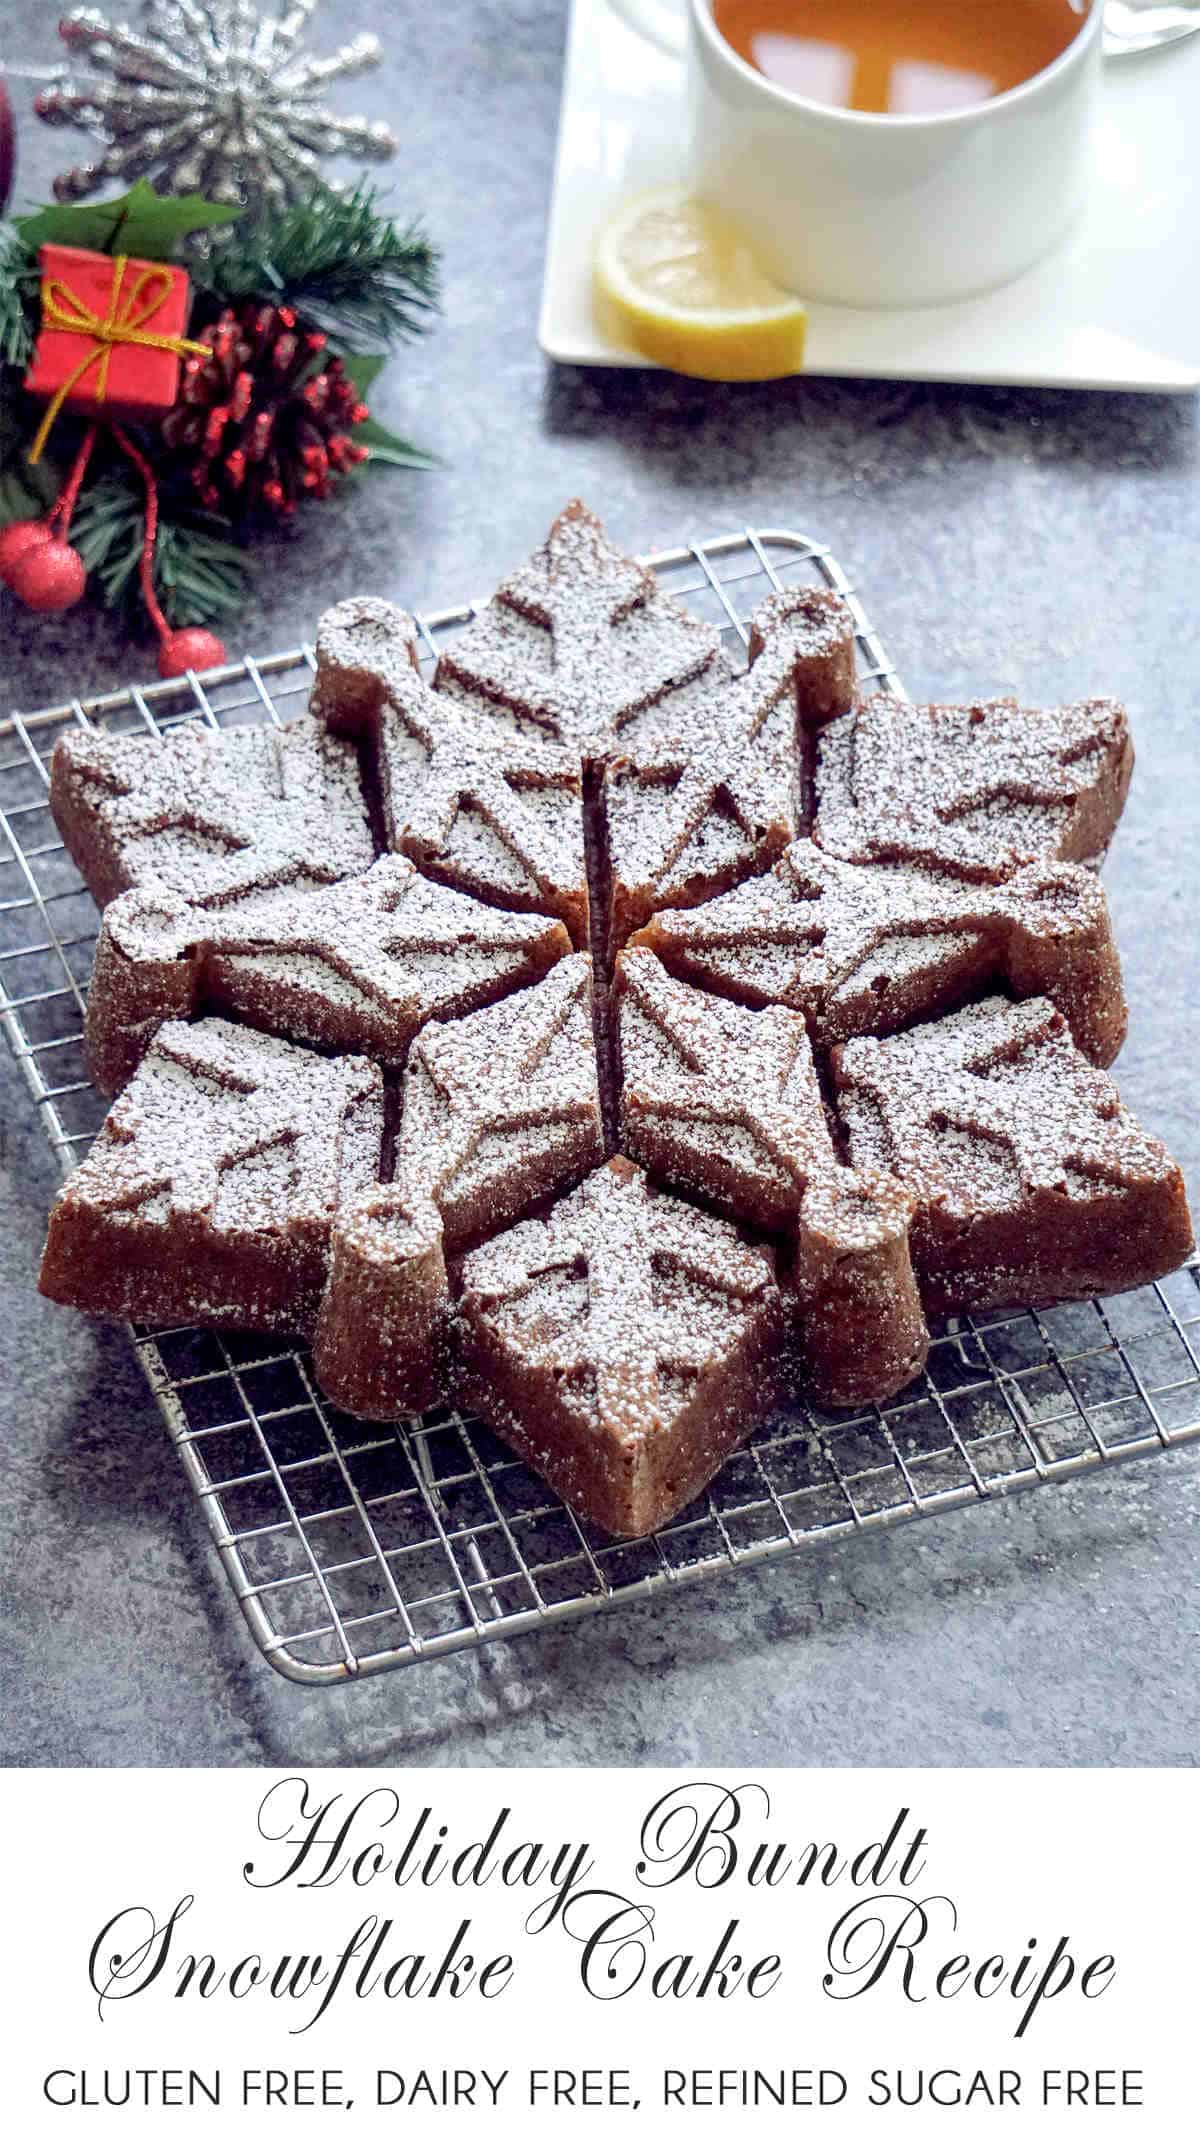 Snowflake cake pan recipe (gluten free dairy free). Celebrate the holiday season with this easy simple snowflake cake pan recipe! A healthy holiday dessert made in a snowflake shaped bundt pan / mold with a mix of gluten free, dairy free clean ingredients. This simple snowflake cake is soft, moist and full of apple and cinnamon flavor – perfect if you want a simple Christmas treat.